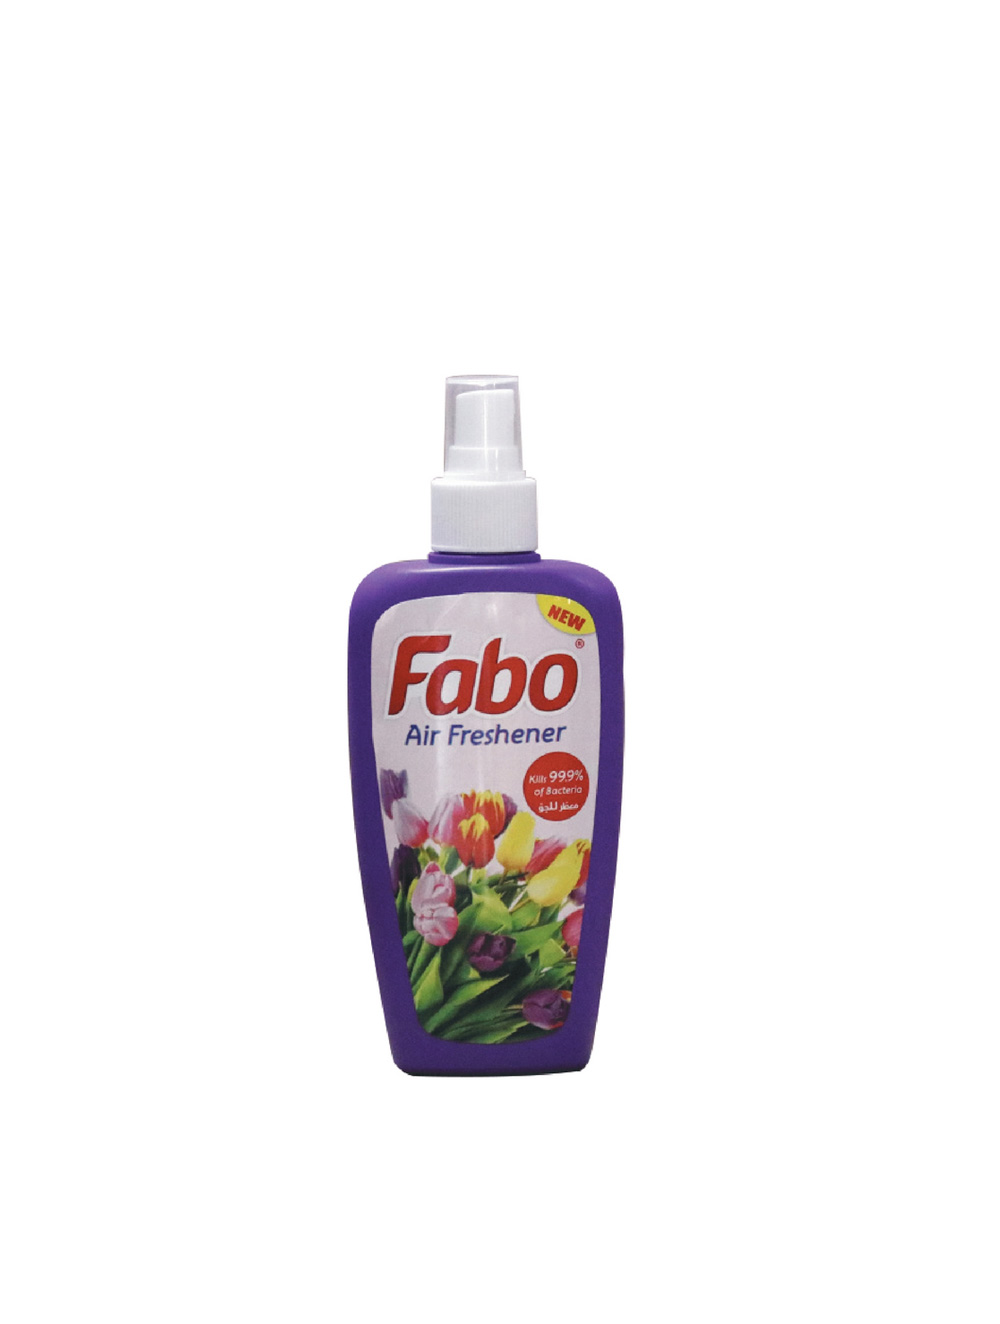 fabo-products_page-0041